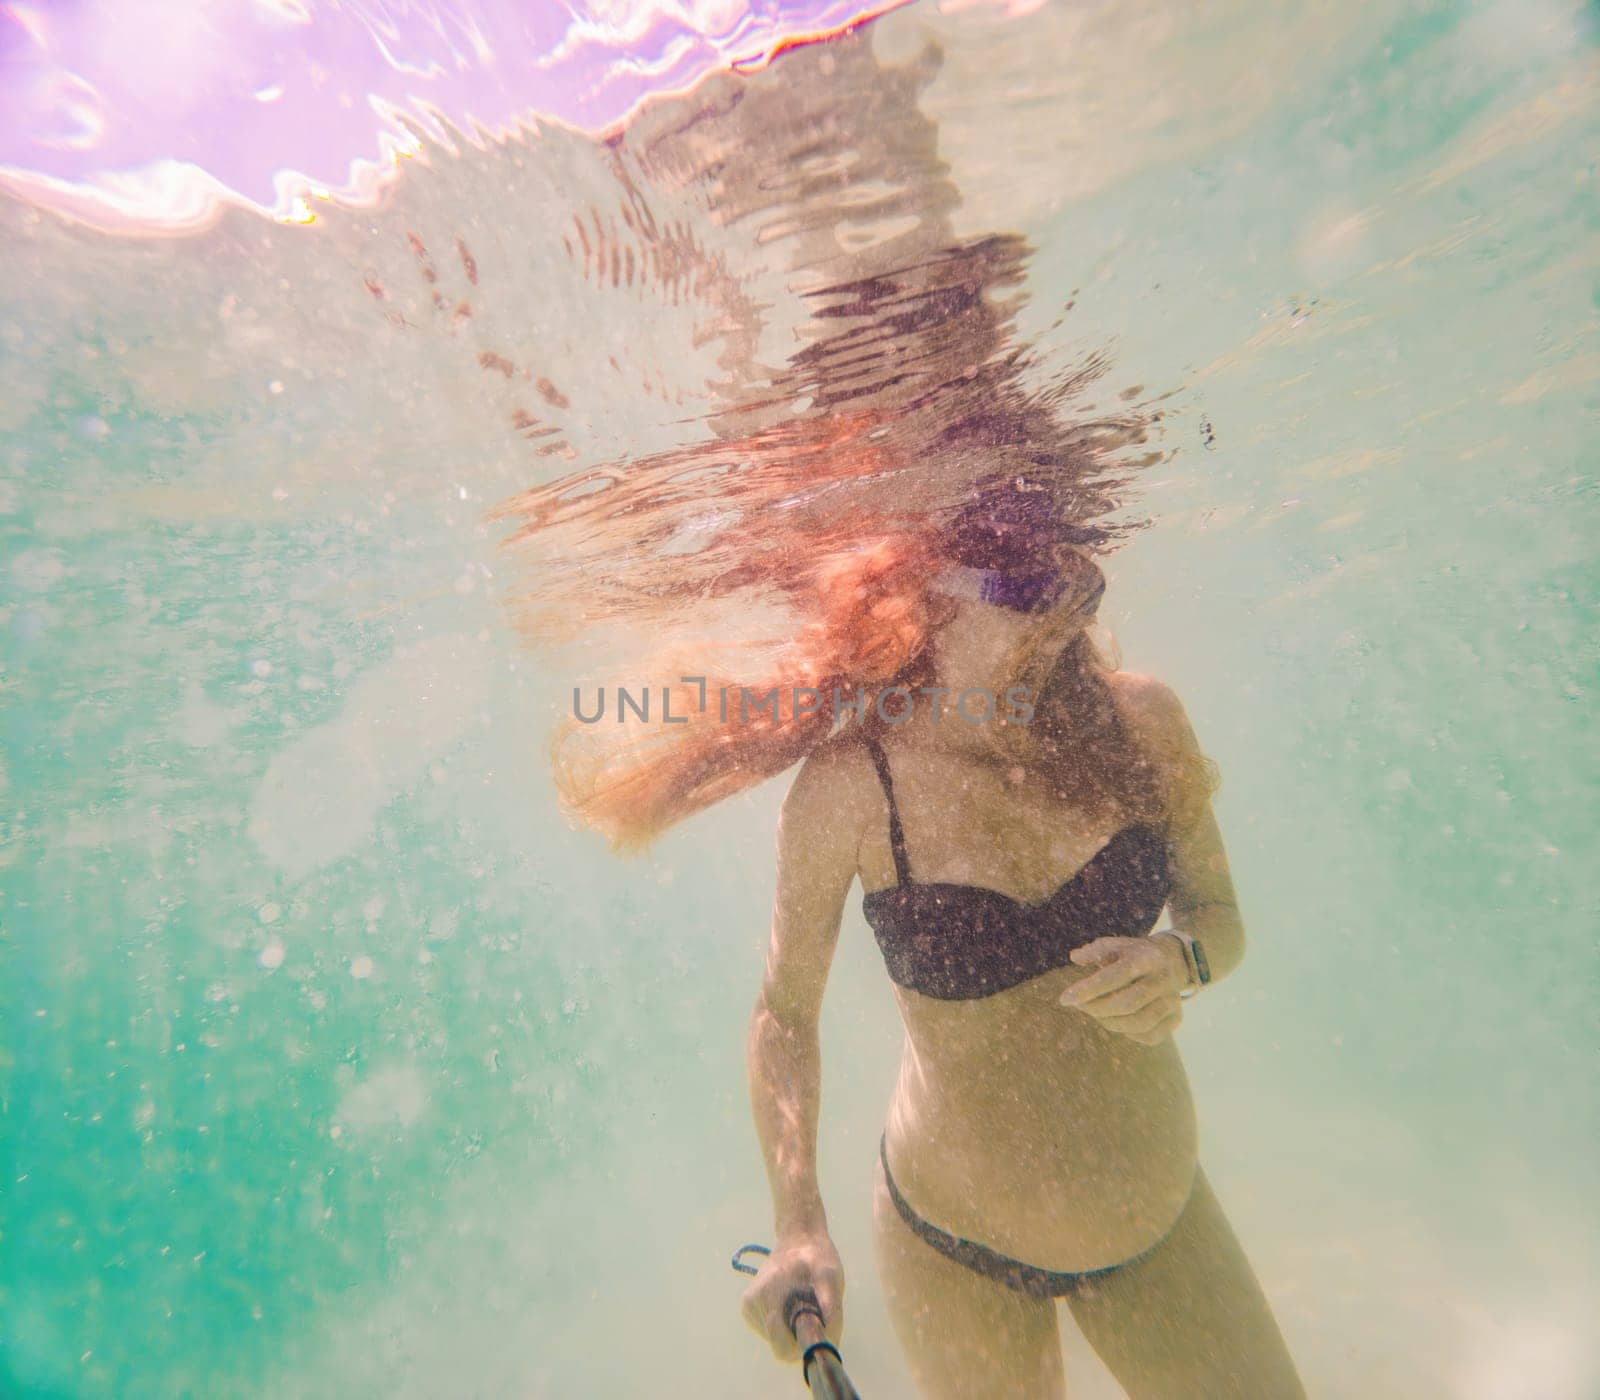 In an ethereal underwater scene, a pregnant woman gracefully floats, embodying the beauty of maternity beneath the tranquil surface of the sea.